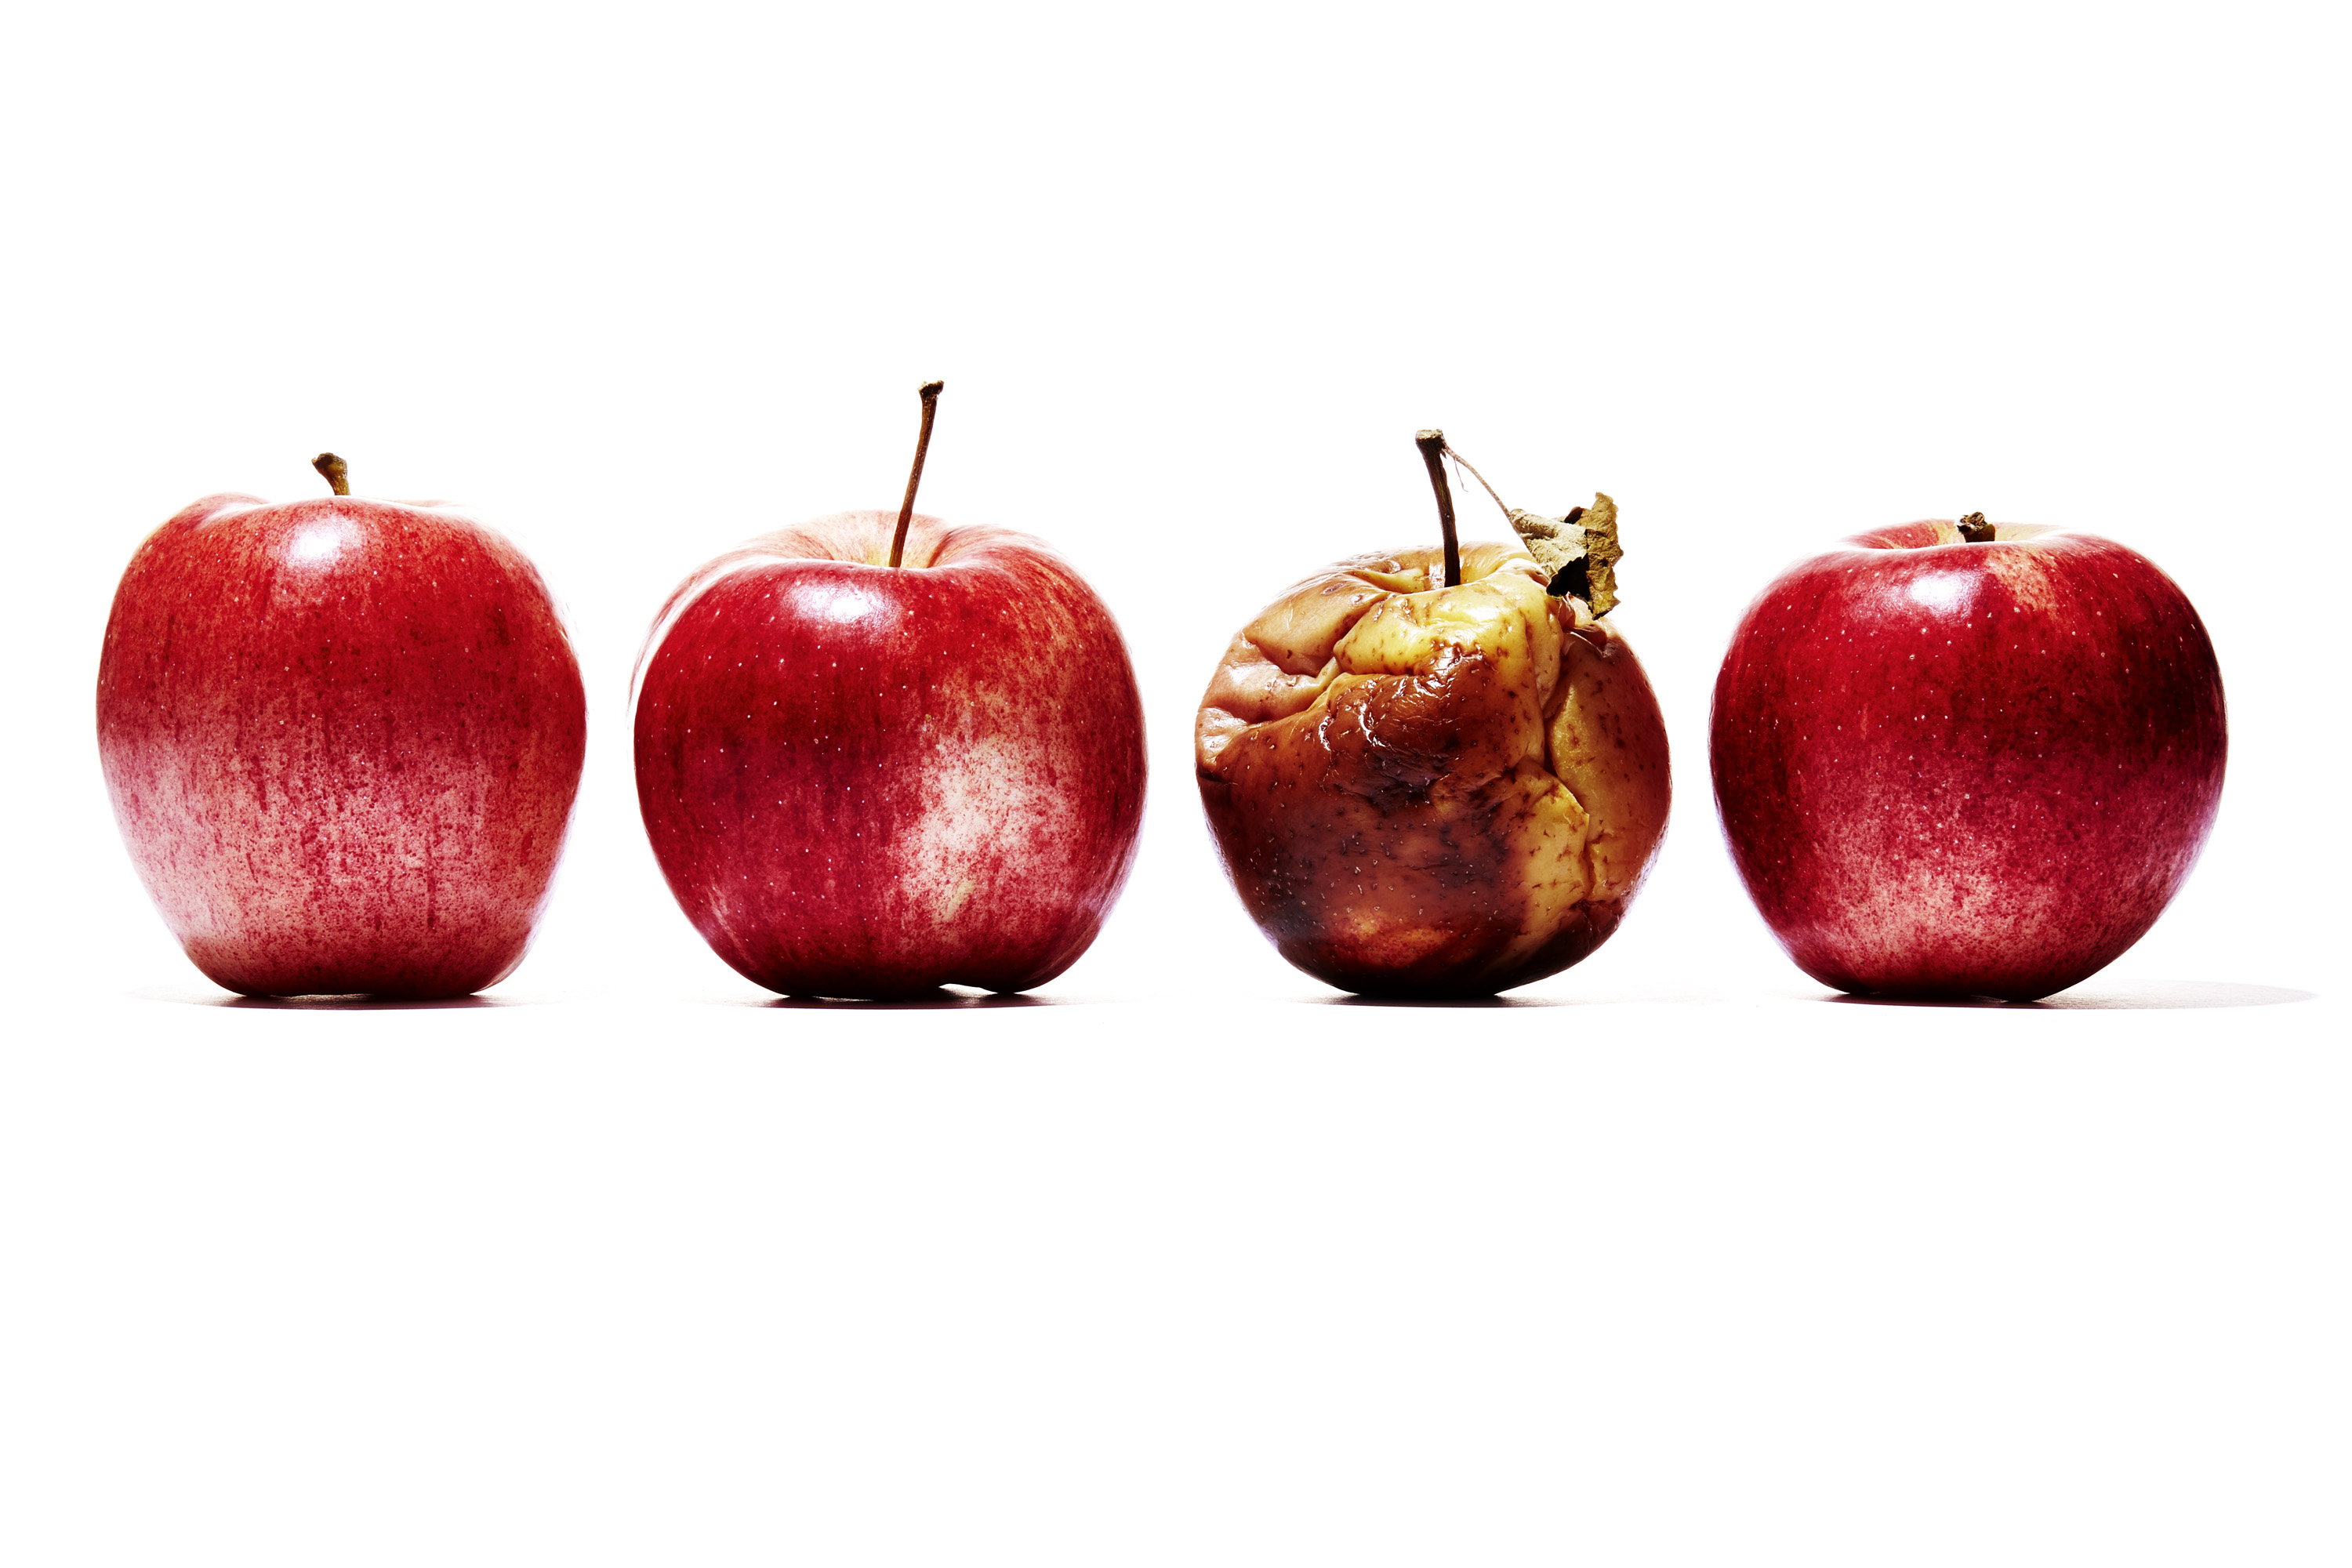 A still life showing 4 red apples in a row. The apple second from right is rotten. (Danny Kim for TIME)